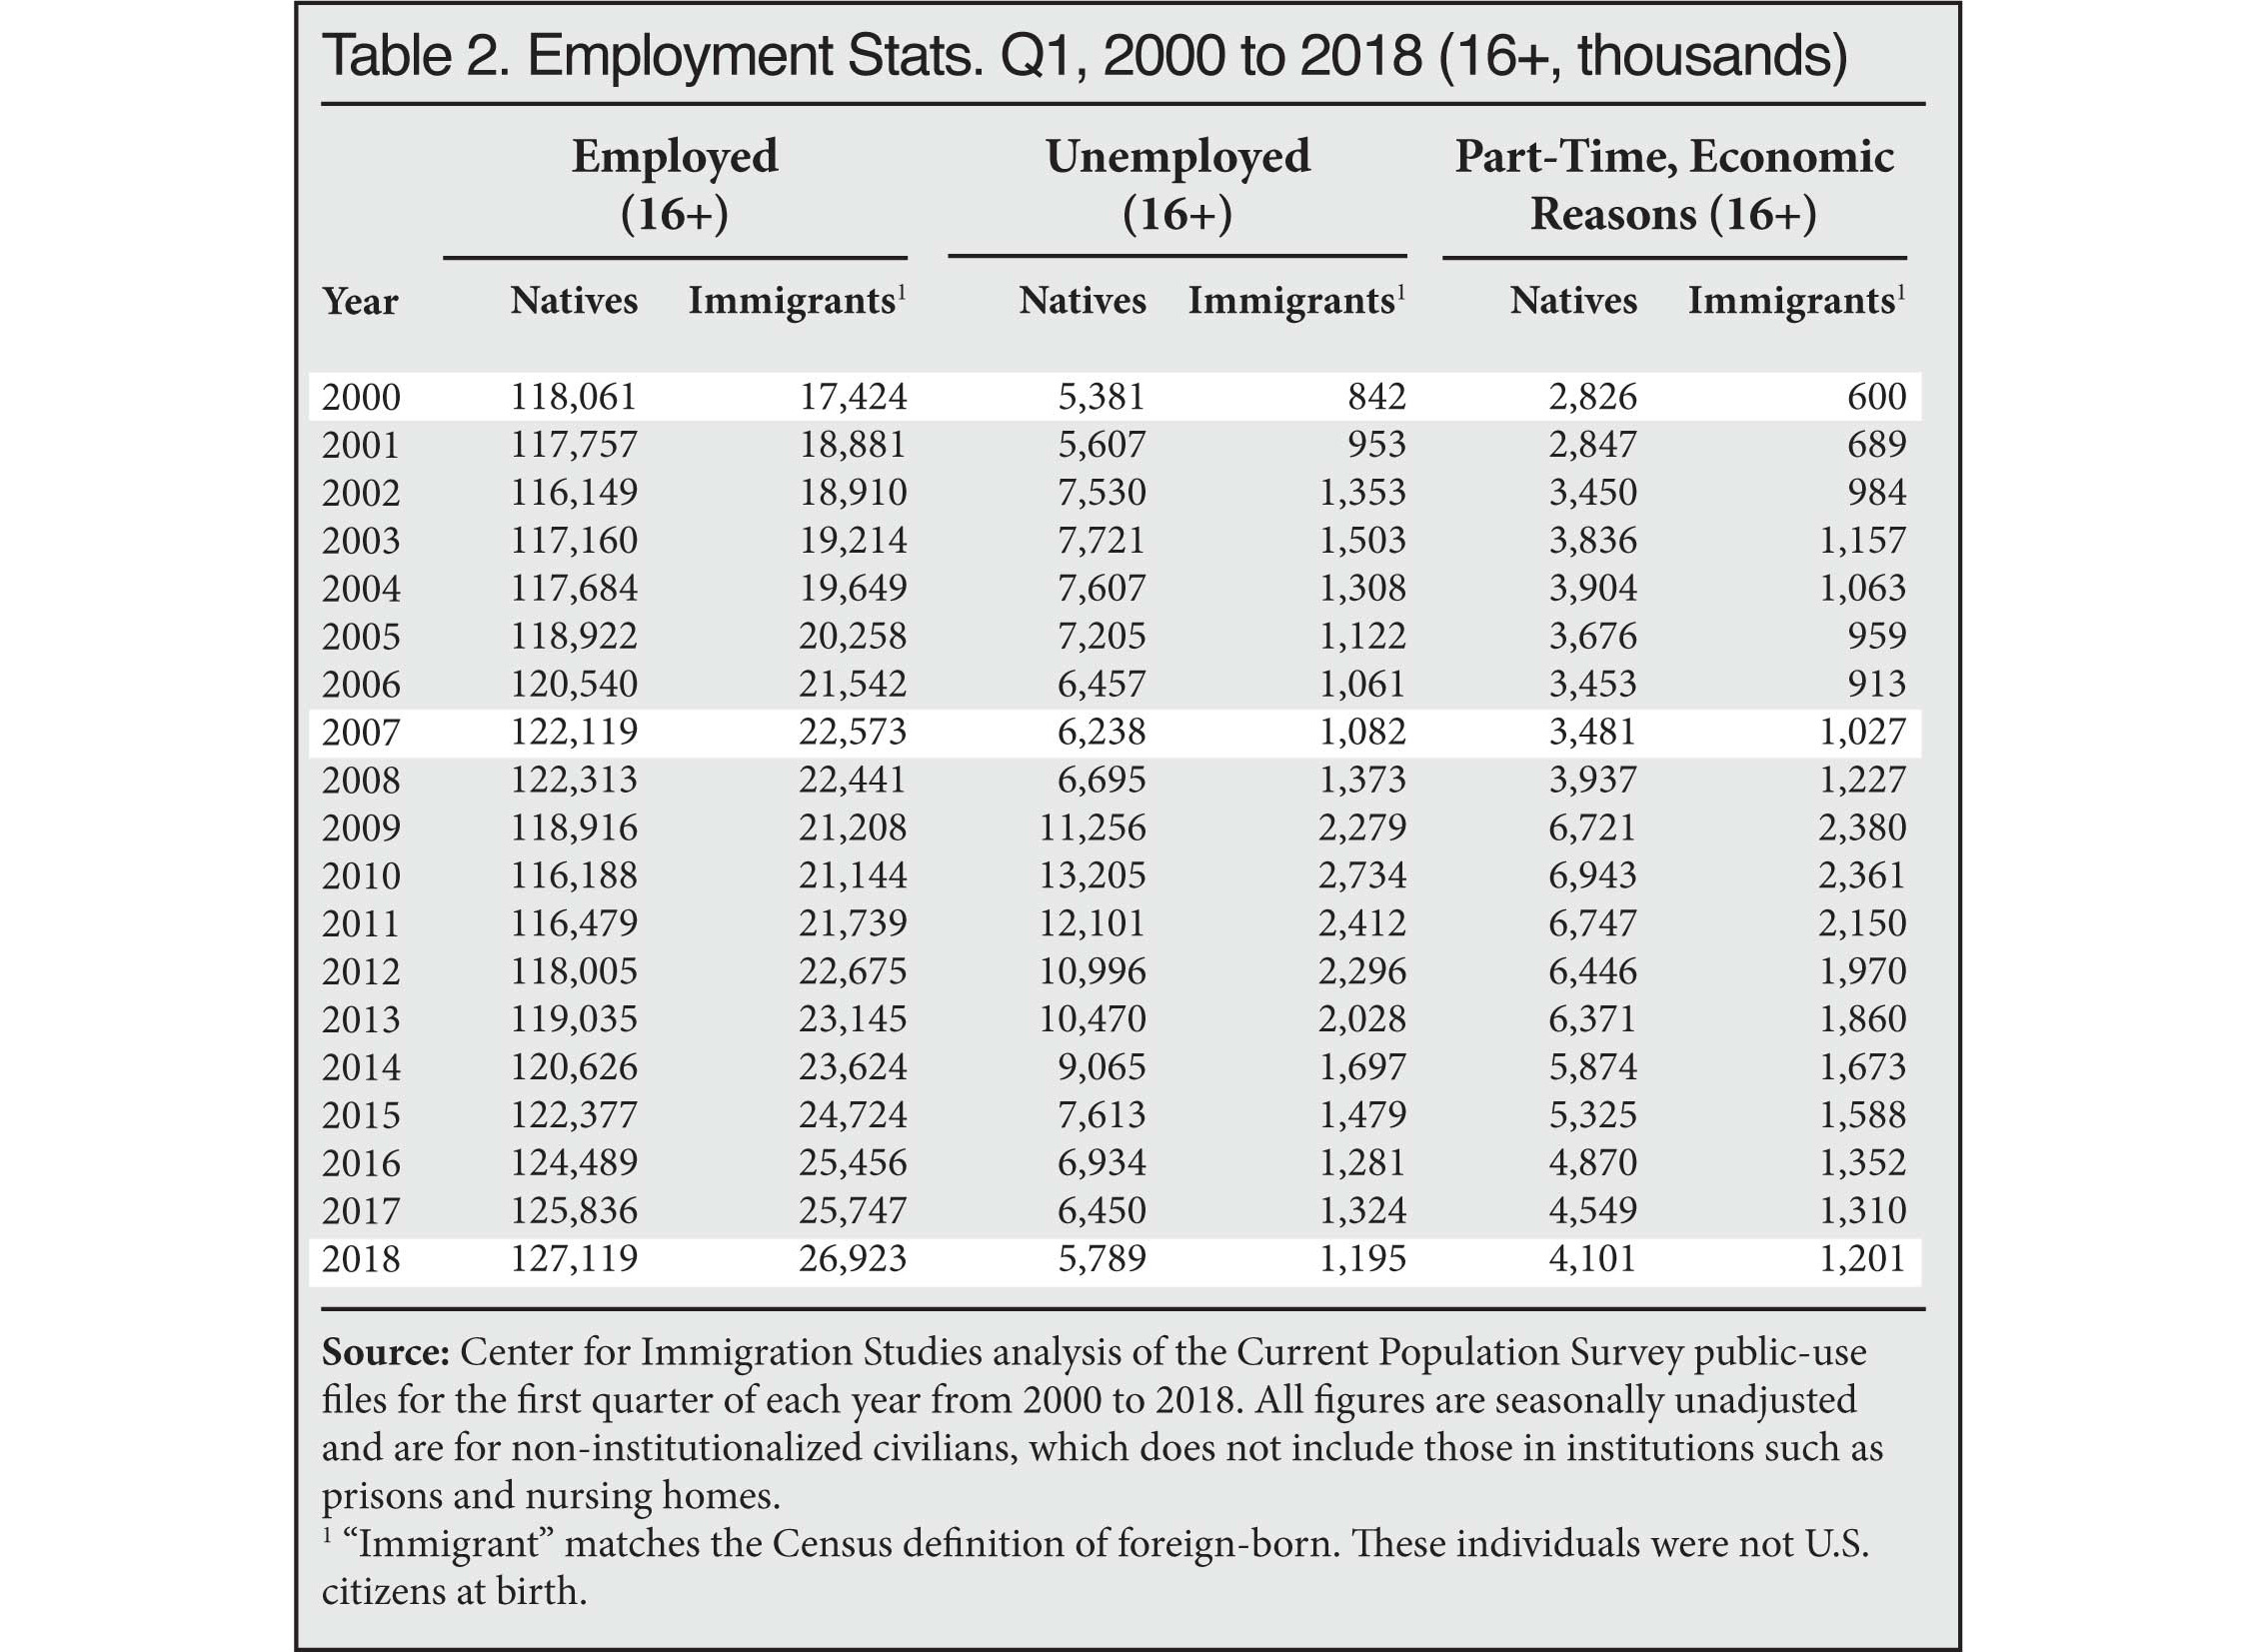 Table: Employment Stats, Q1, 2000 to 2018